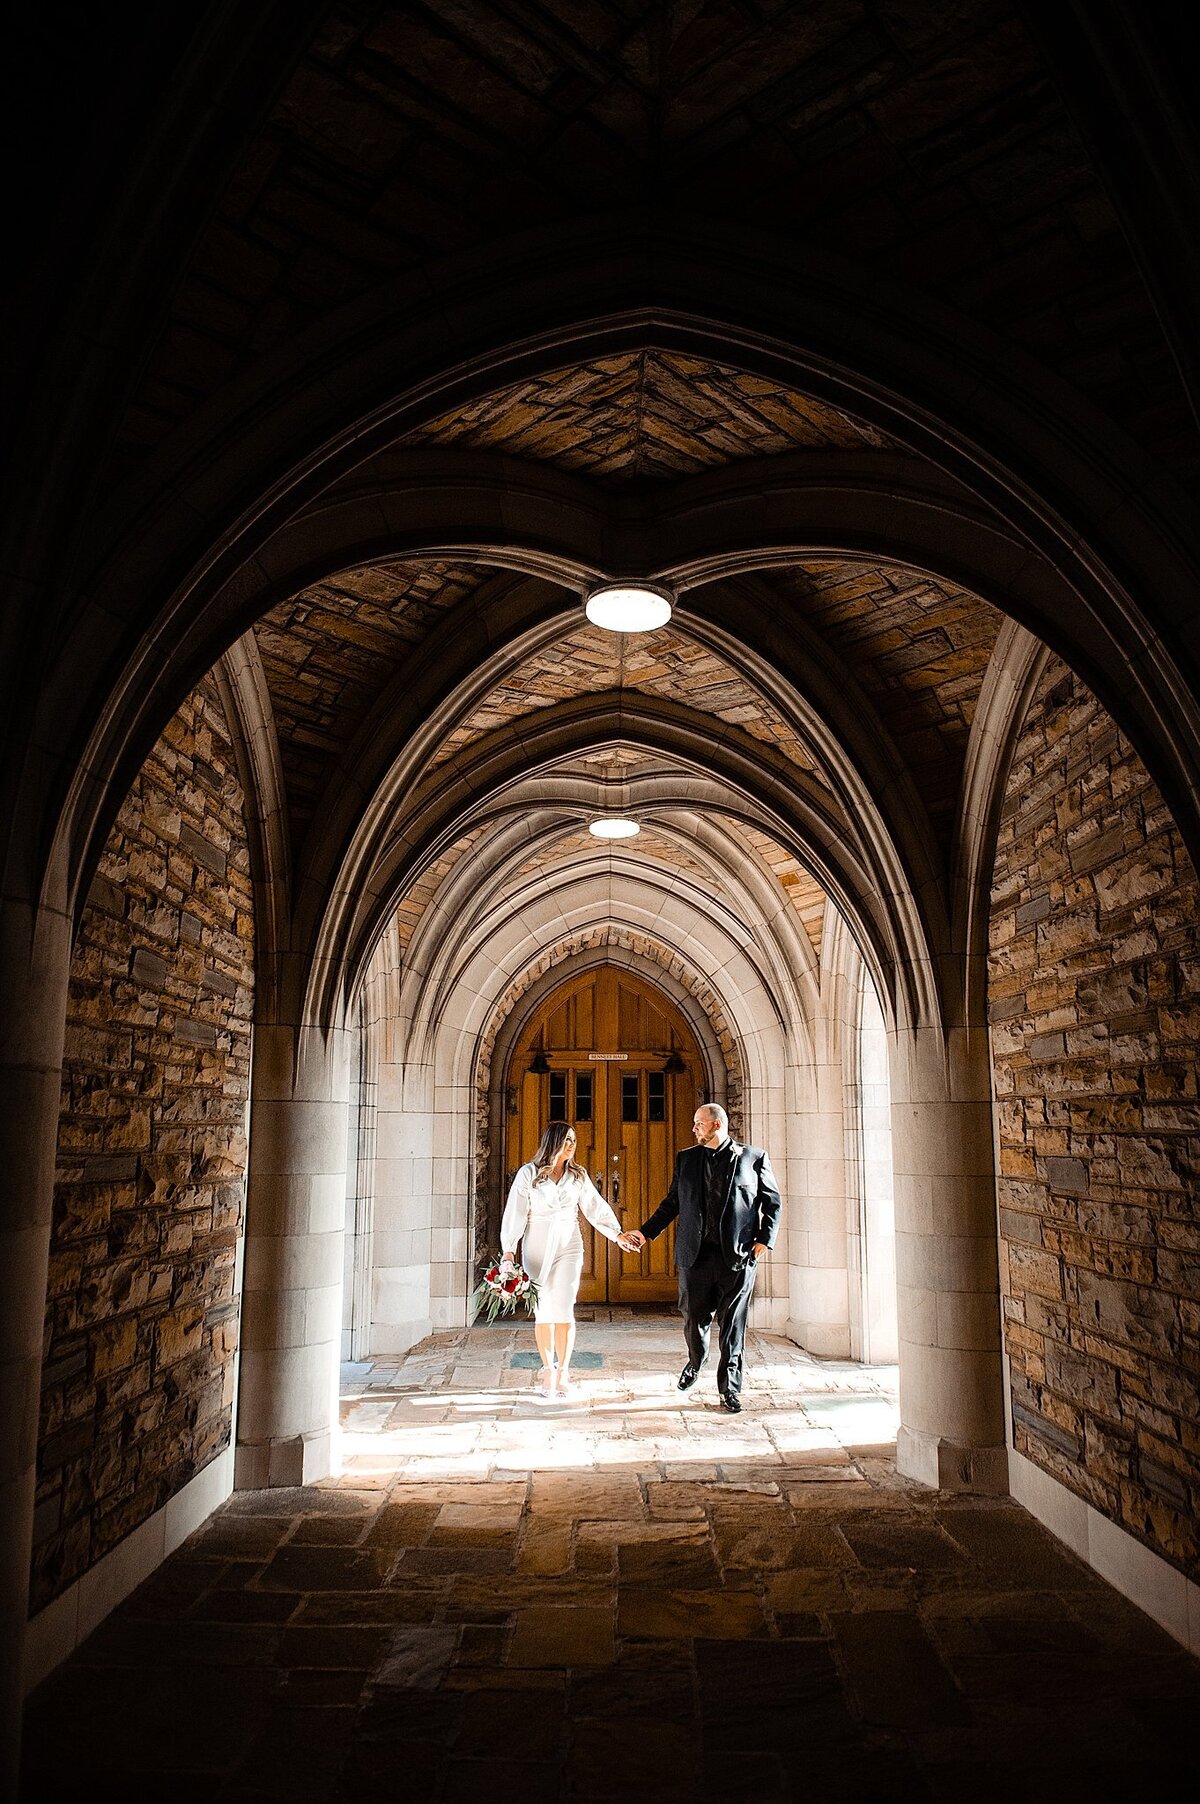 Standing in the arched entryway at Scarritt Bennett, the bride and groom hold hands as they walk. The bride is wearing a tea-length white dress with three quarter length sleeves, holding a pink, red and ivory bouquet. The groom is wearing a dark gray suit with a black shirt.